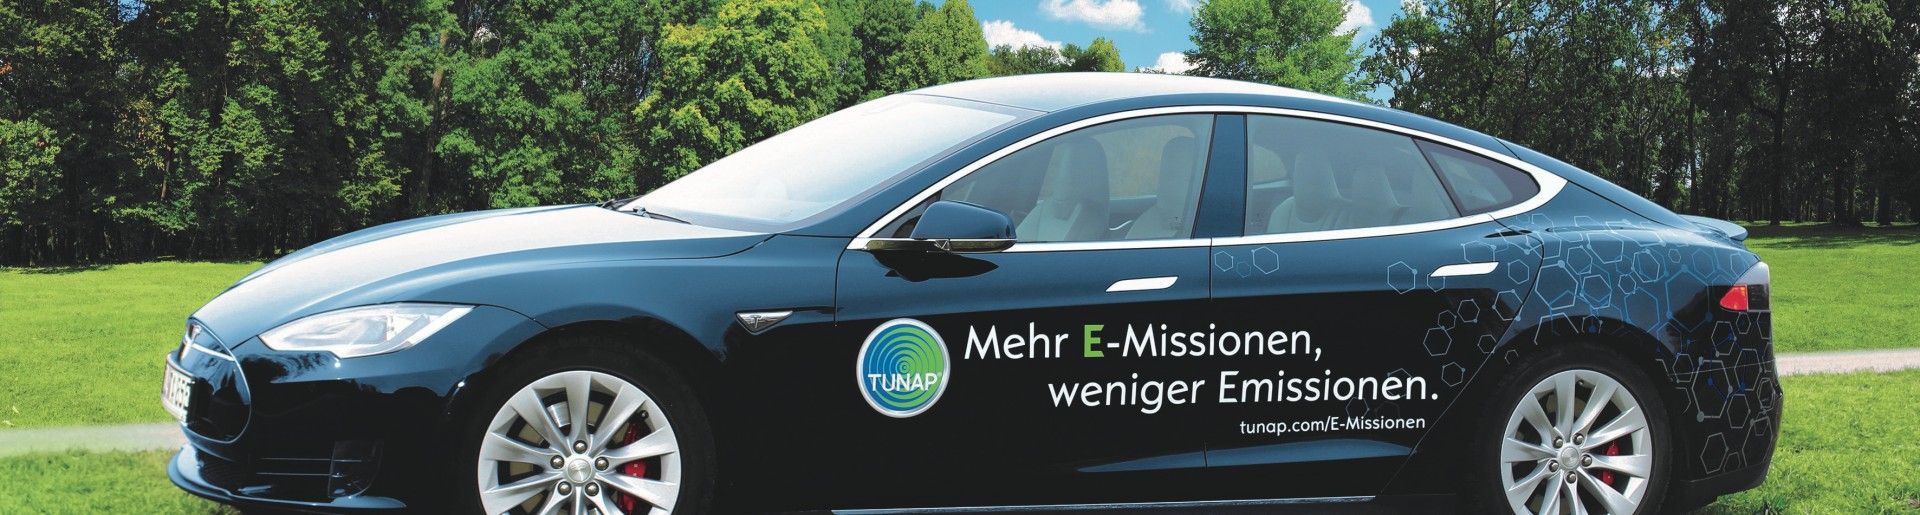 Side view of a dark blue sports car with white lettering and a TUNAP logo on a green meadow